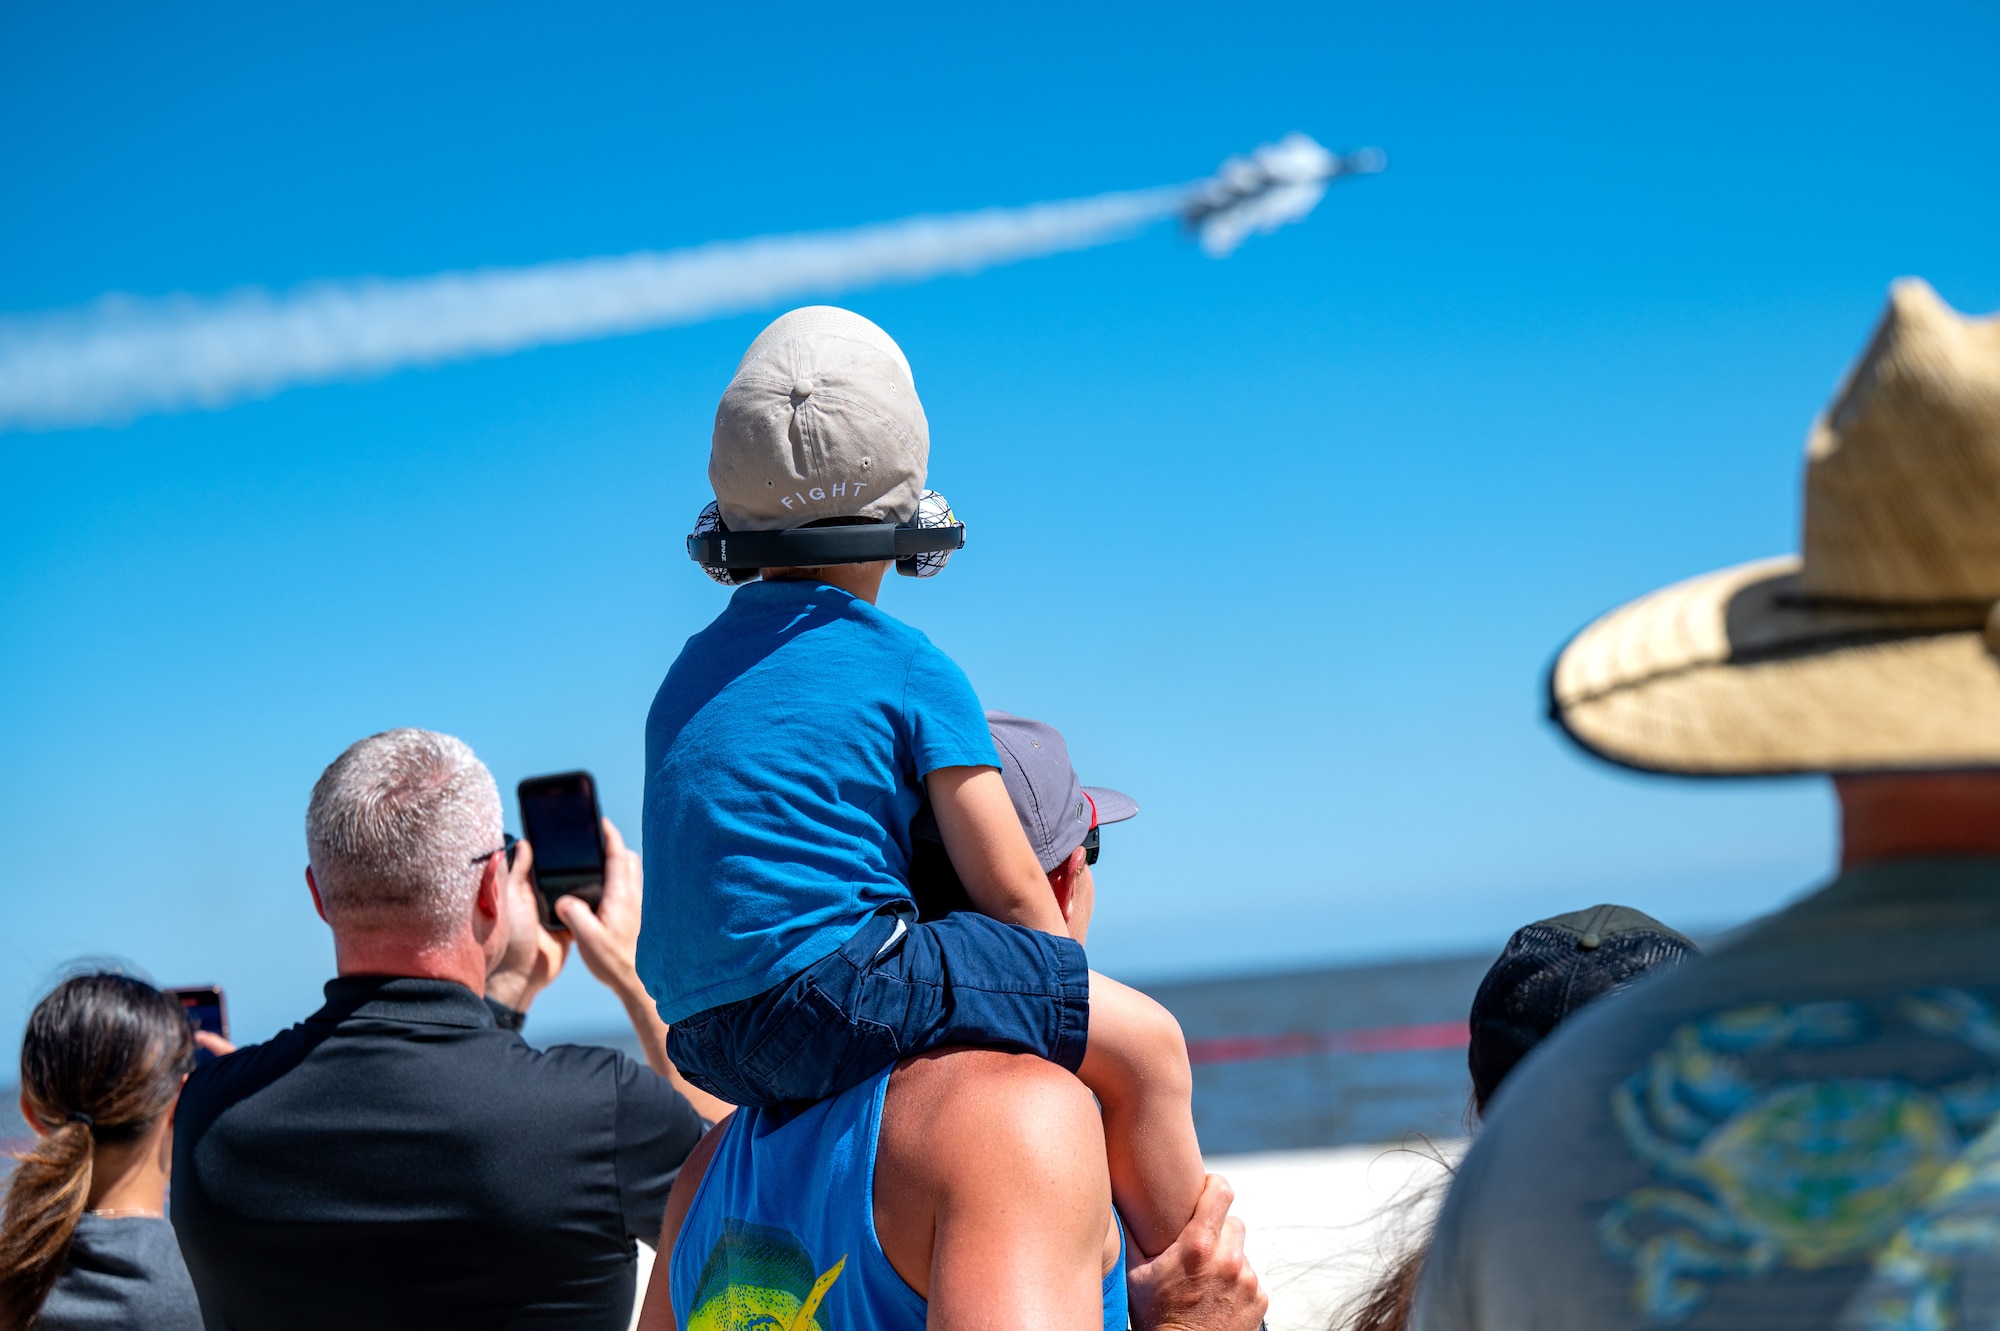 Special Olympics Mississippi athletes and guests watch the Thunderbirds perform a practice session for the 2023 Thunder Over the Sound Air and Space Show at Biloxi Beach in Biloxi, Mississippi, April 28, 2023. Thunder Over the Sound is a unique event where a military installation and its surrounding city jointly host an air show in two locations; Biloxi Beach and Keesler's flightline. (U.S. Air Force photo by Airman 1st Class Trenten Walters)